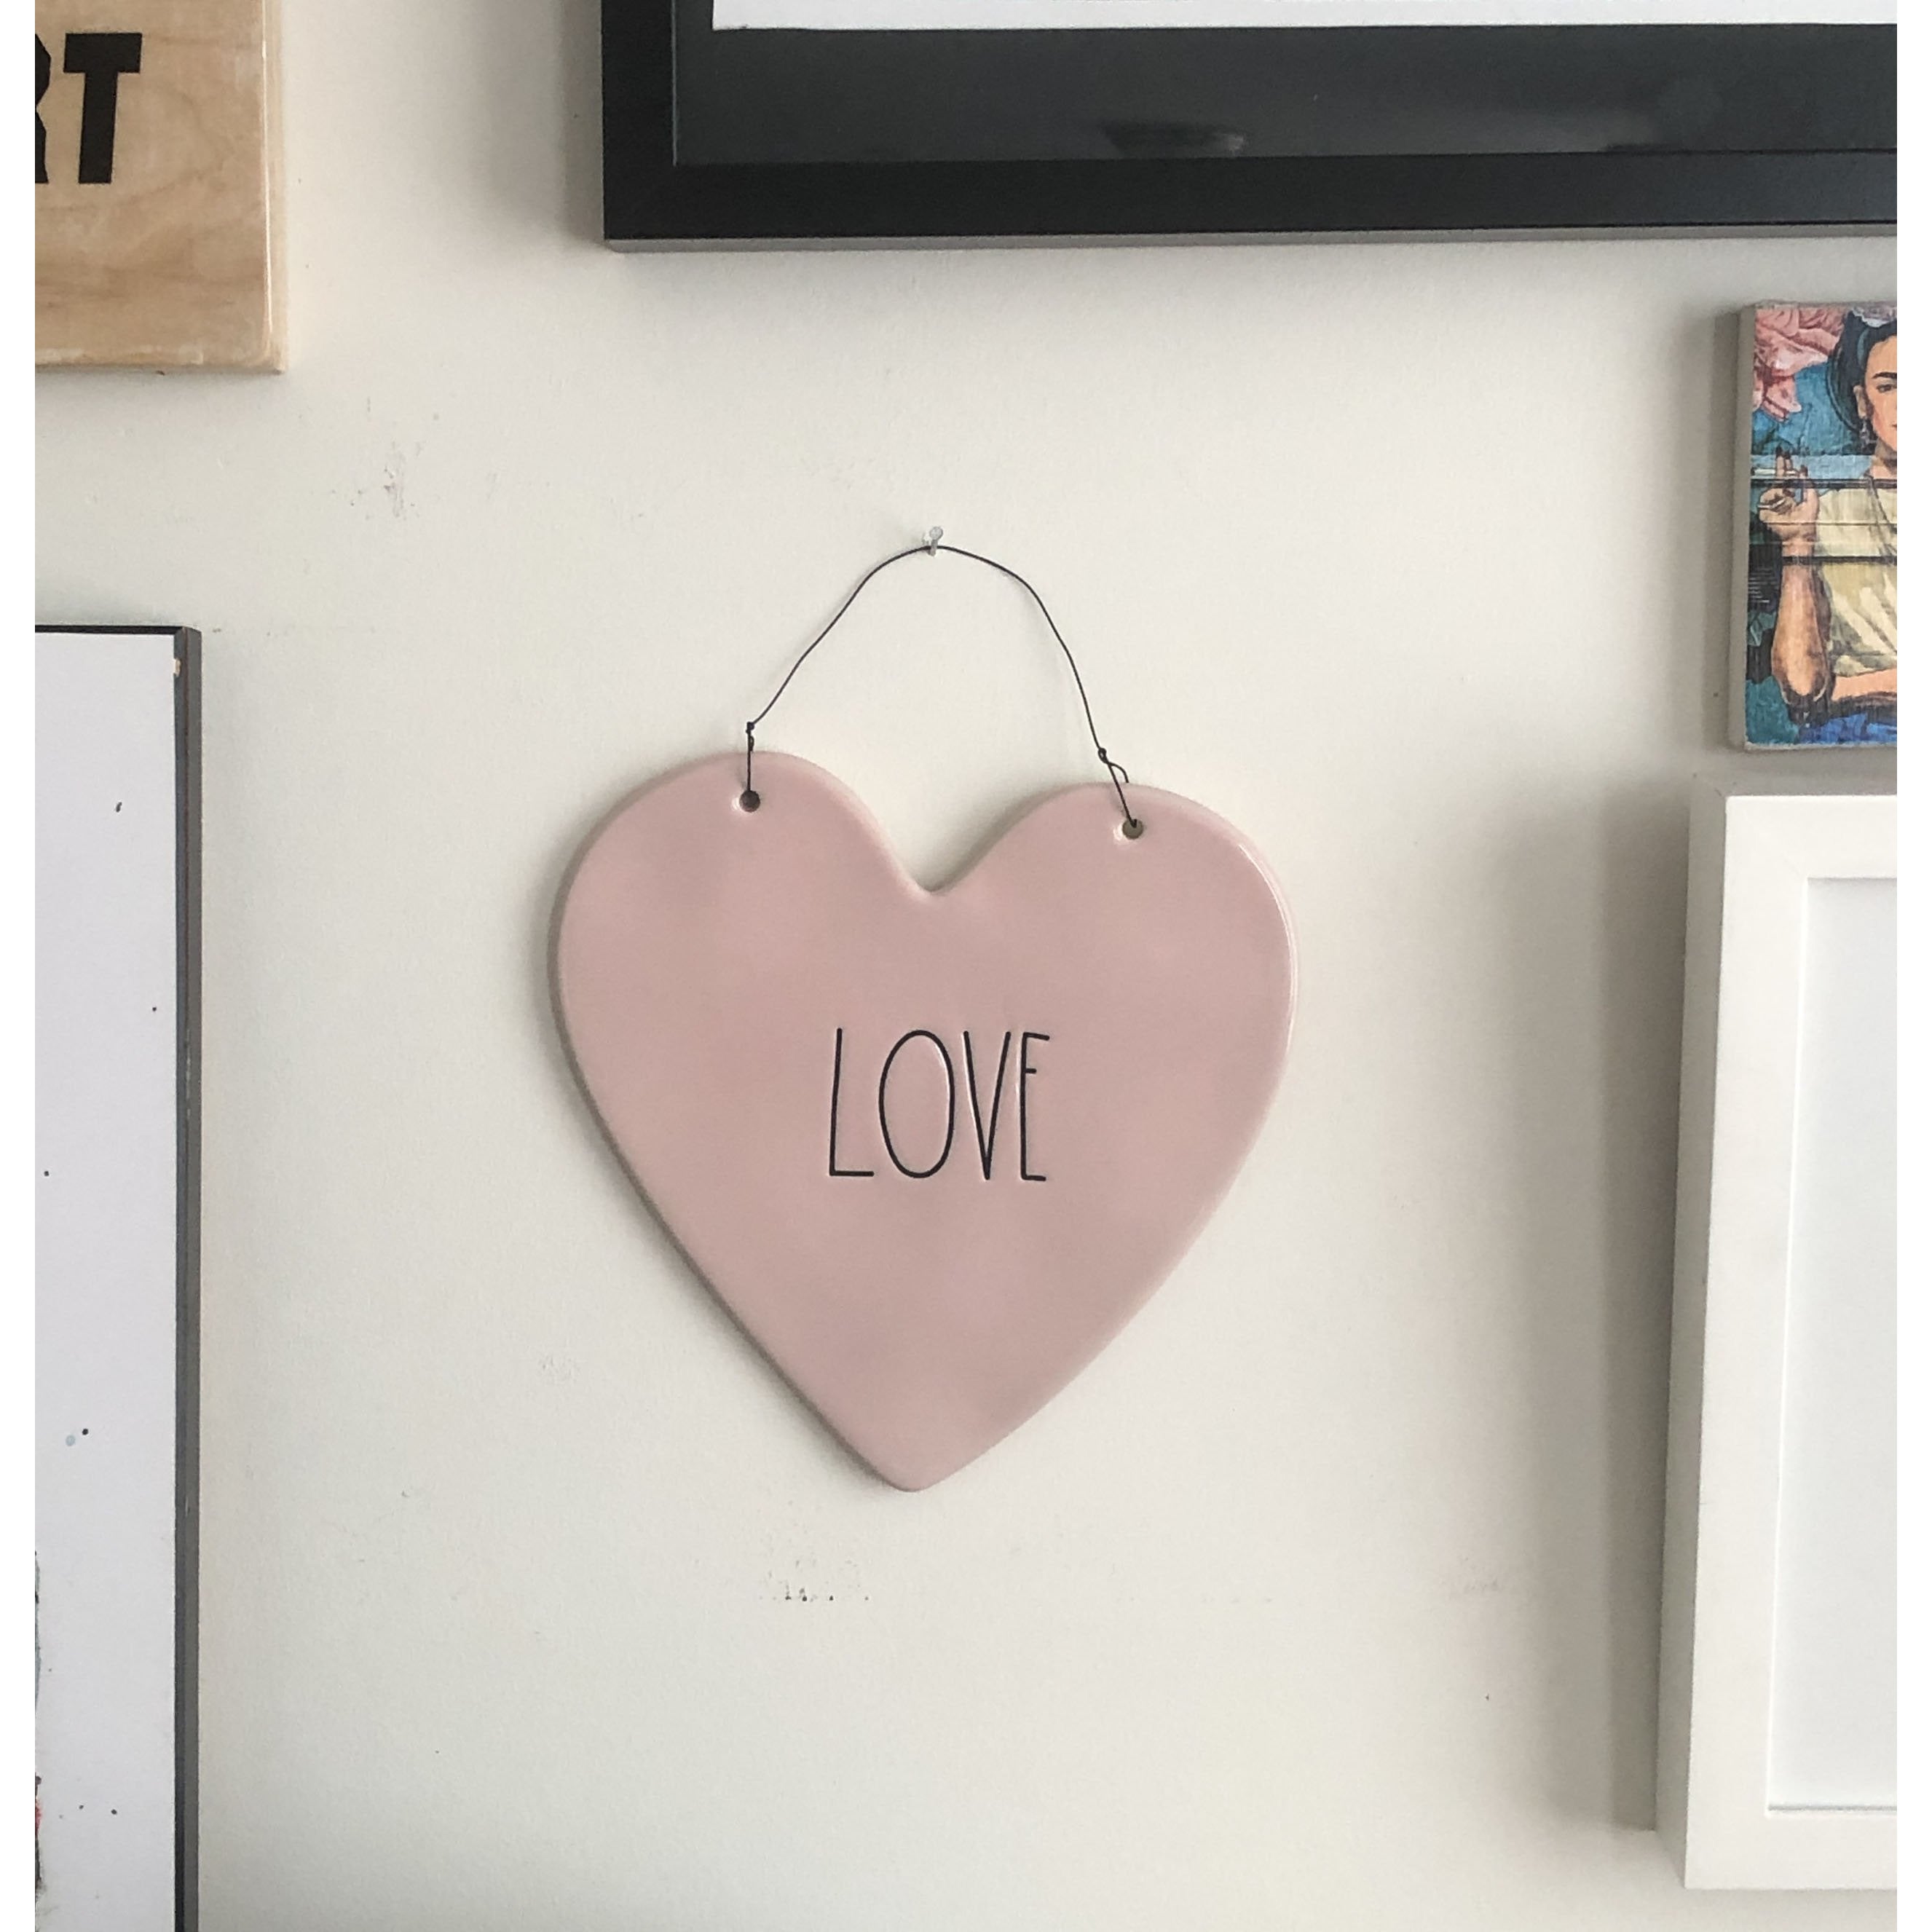 Rae Dunn Heart Shaped Ceramic Wall Hanging in Pink with Love In Black Font